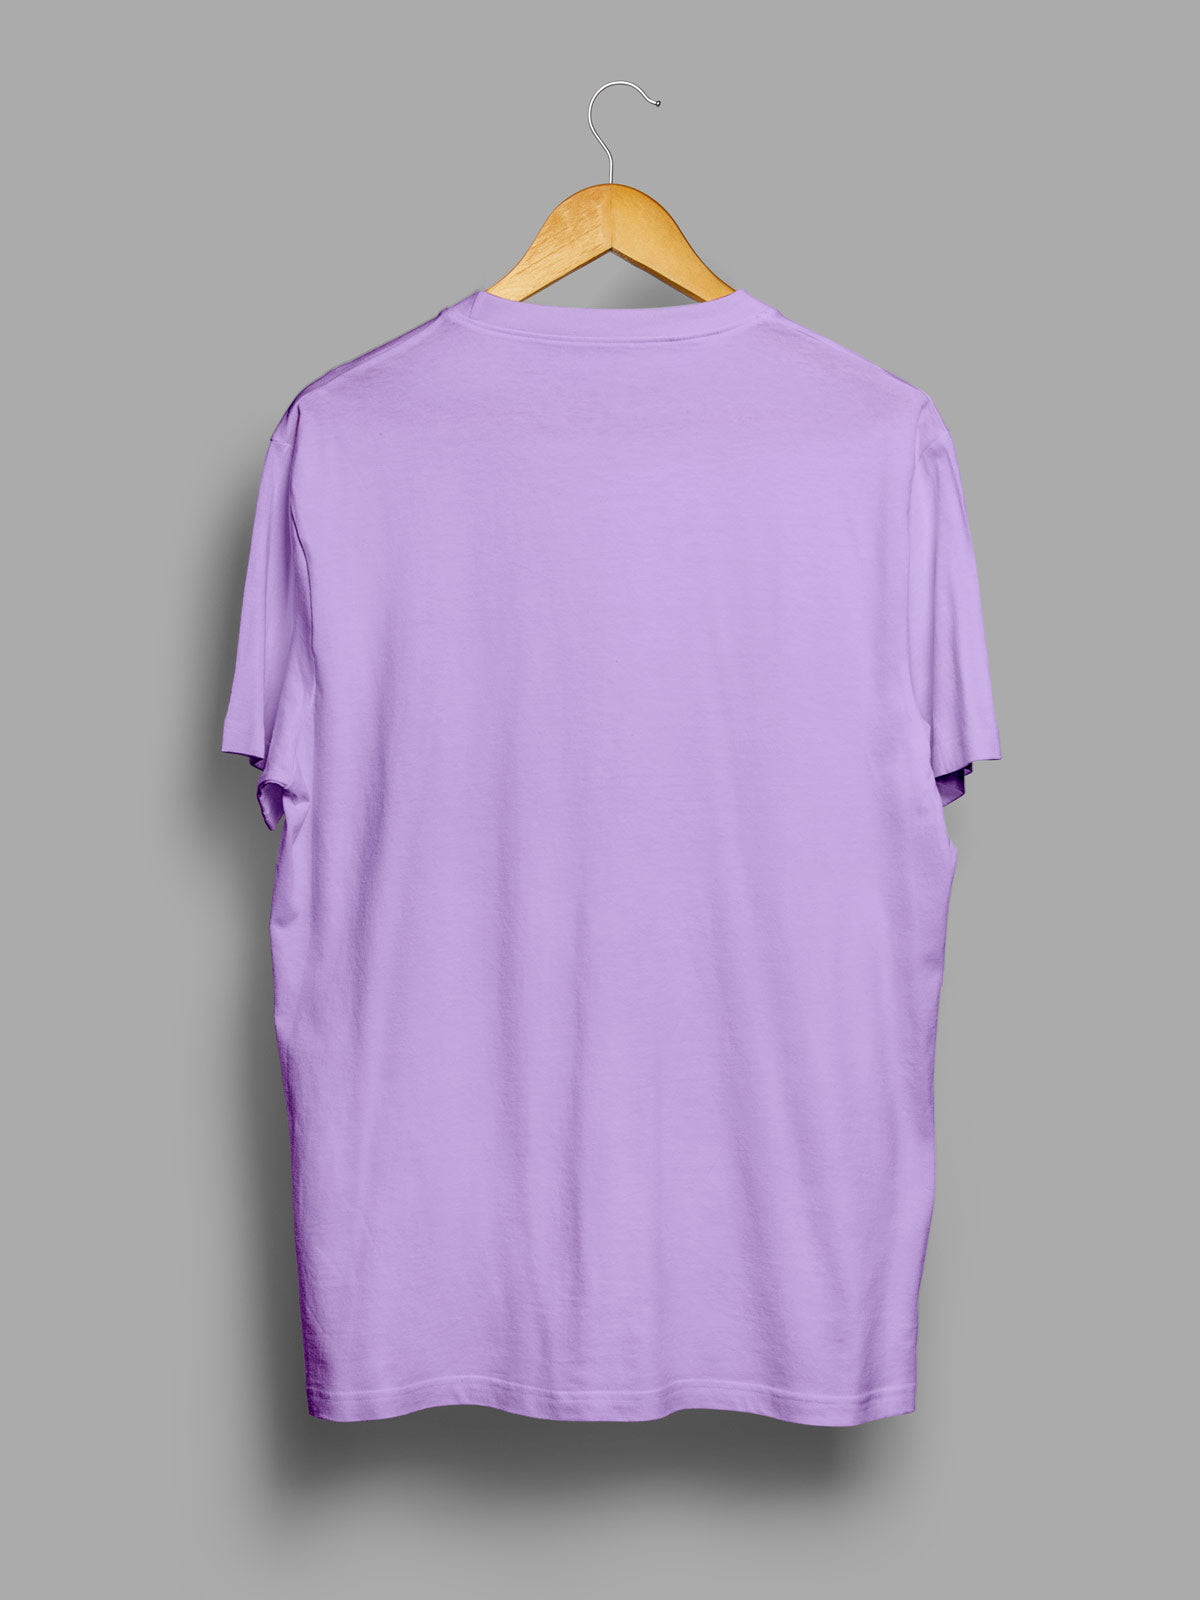 Lavender-t-shirt-for-men by Ghumakkad